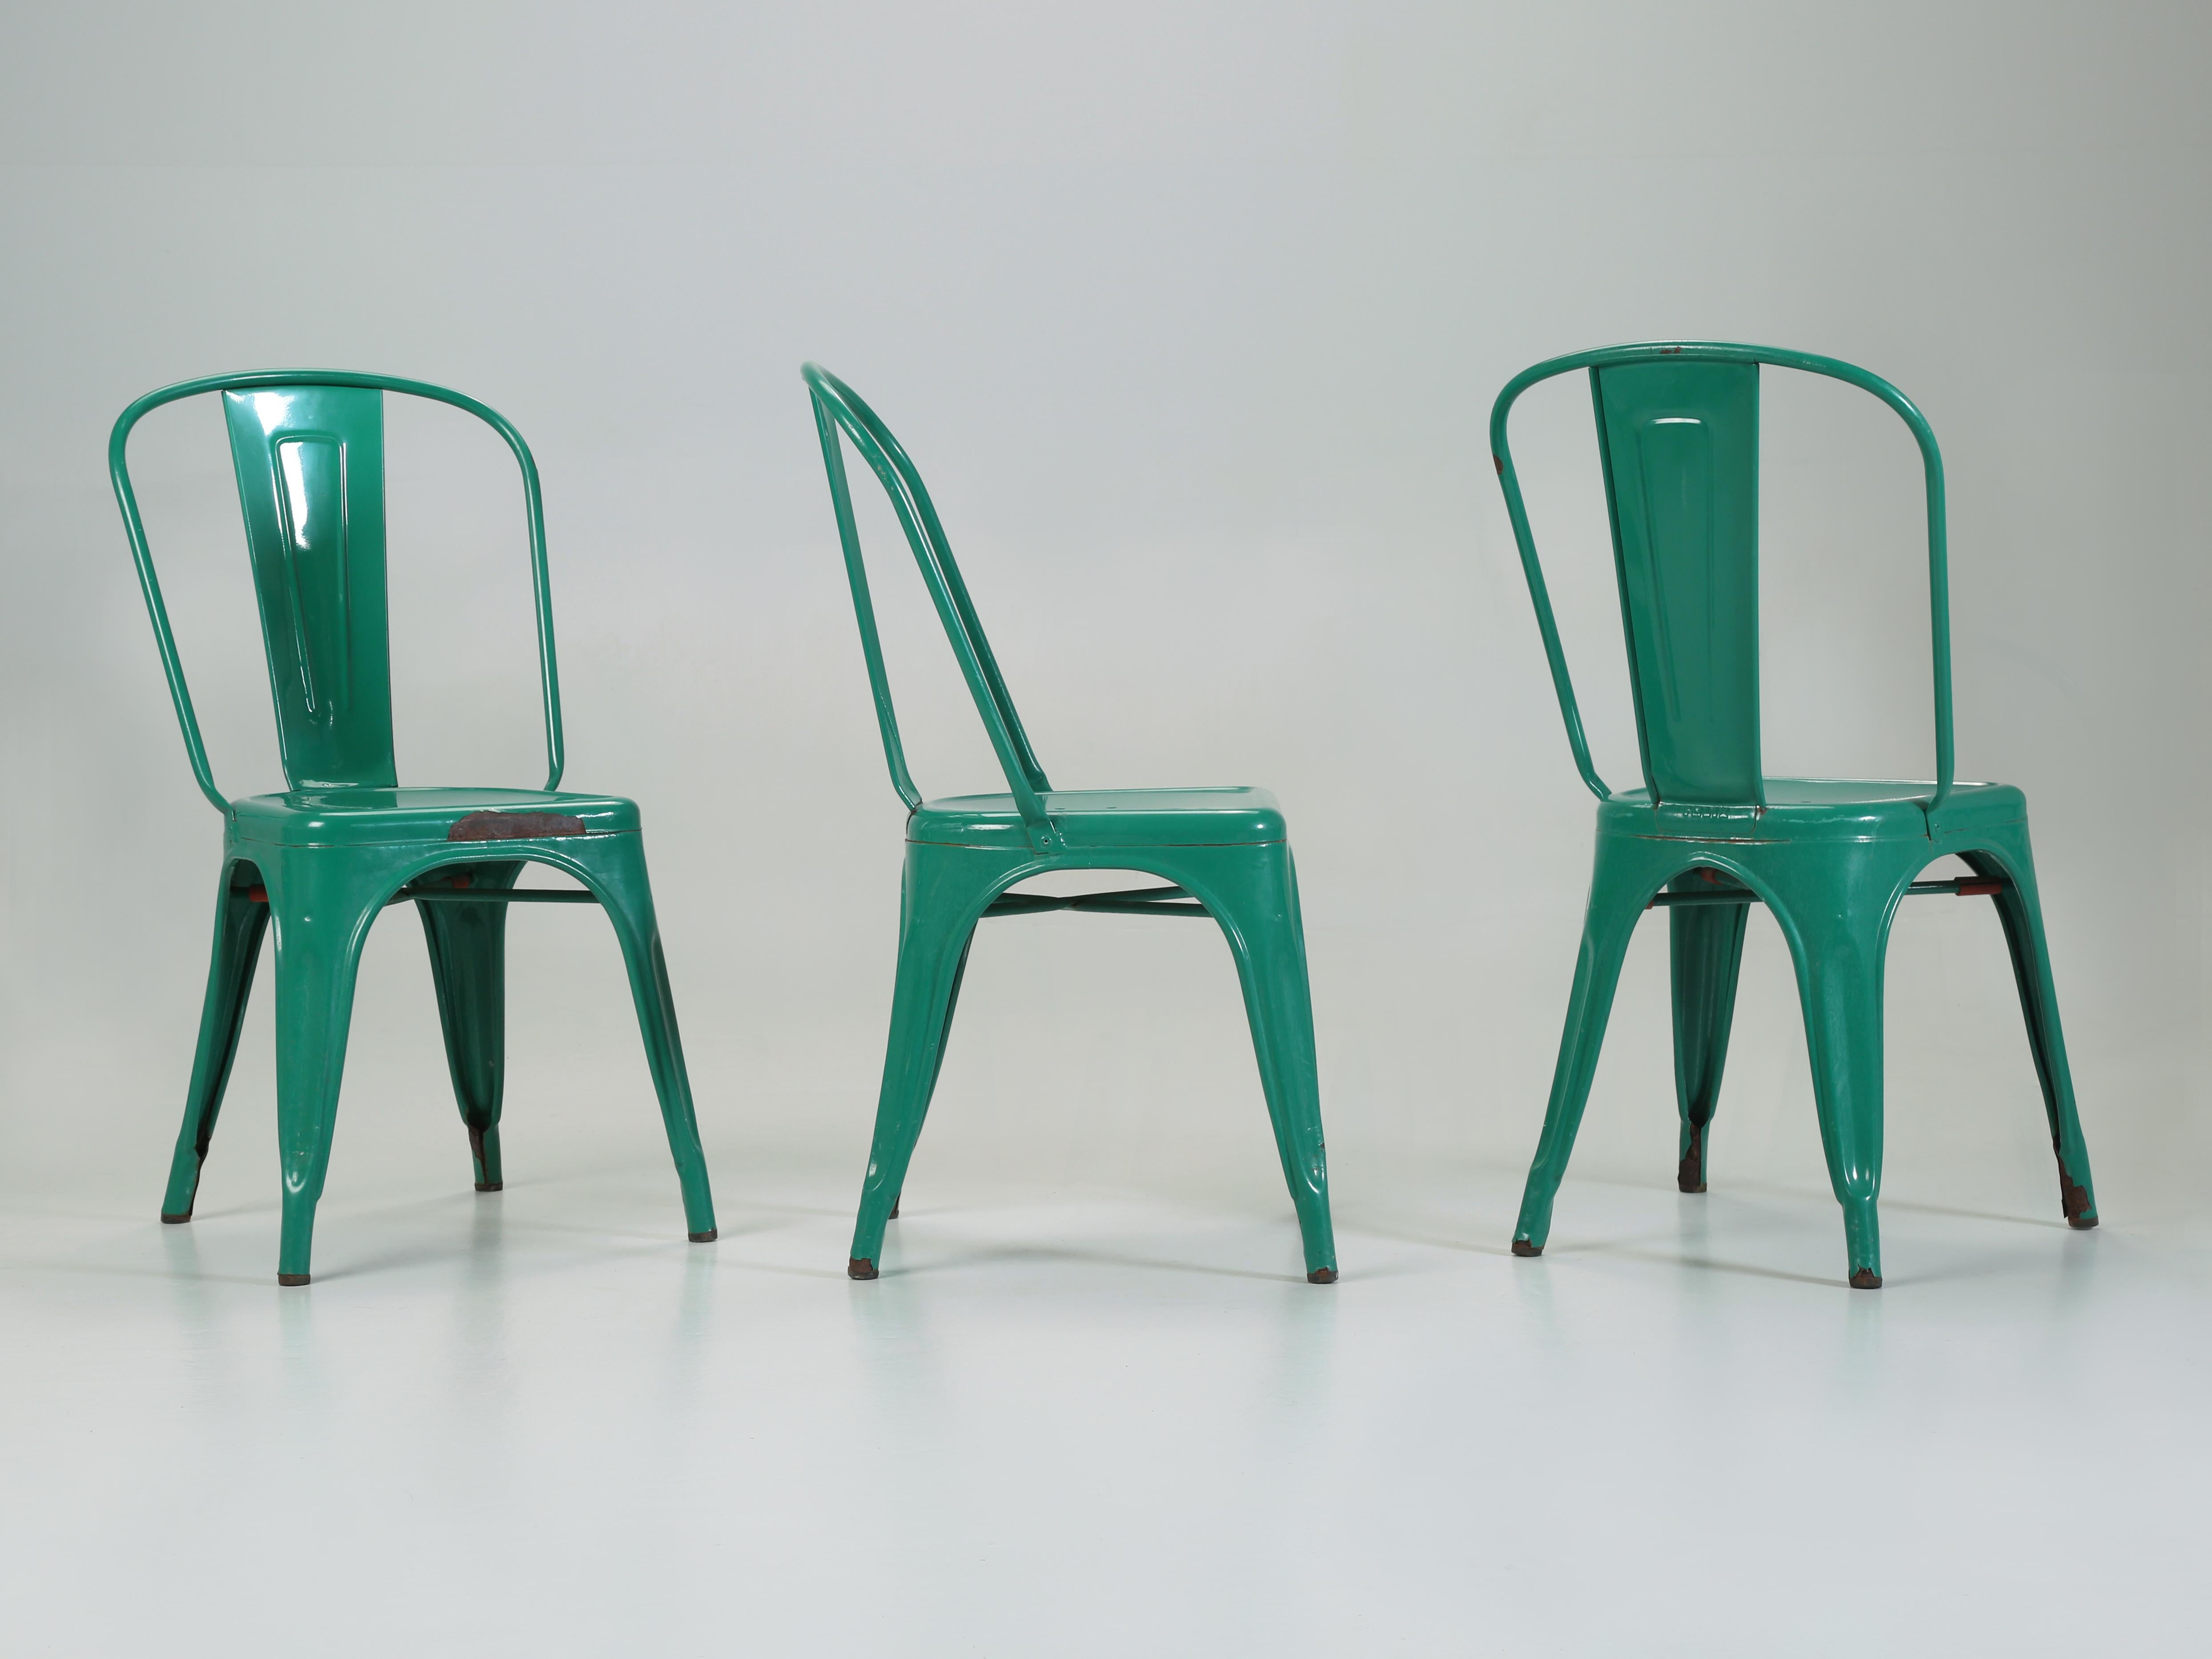 Genuine Set of (6) French Hand-Made Vintage Tolix Steel Stacking Chairs in distressed Envy Green Paint. Currently we stock over 1000 pieces of French Made Tolix Steel Stacking Chairs, Stacking Stools in three different heights and of course Tolix